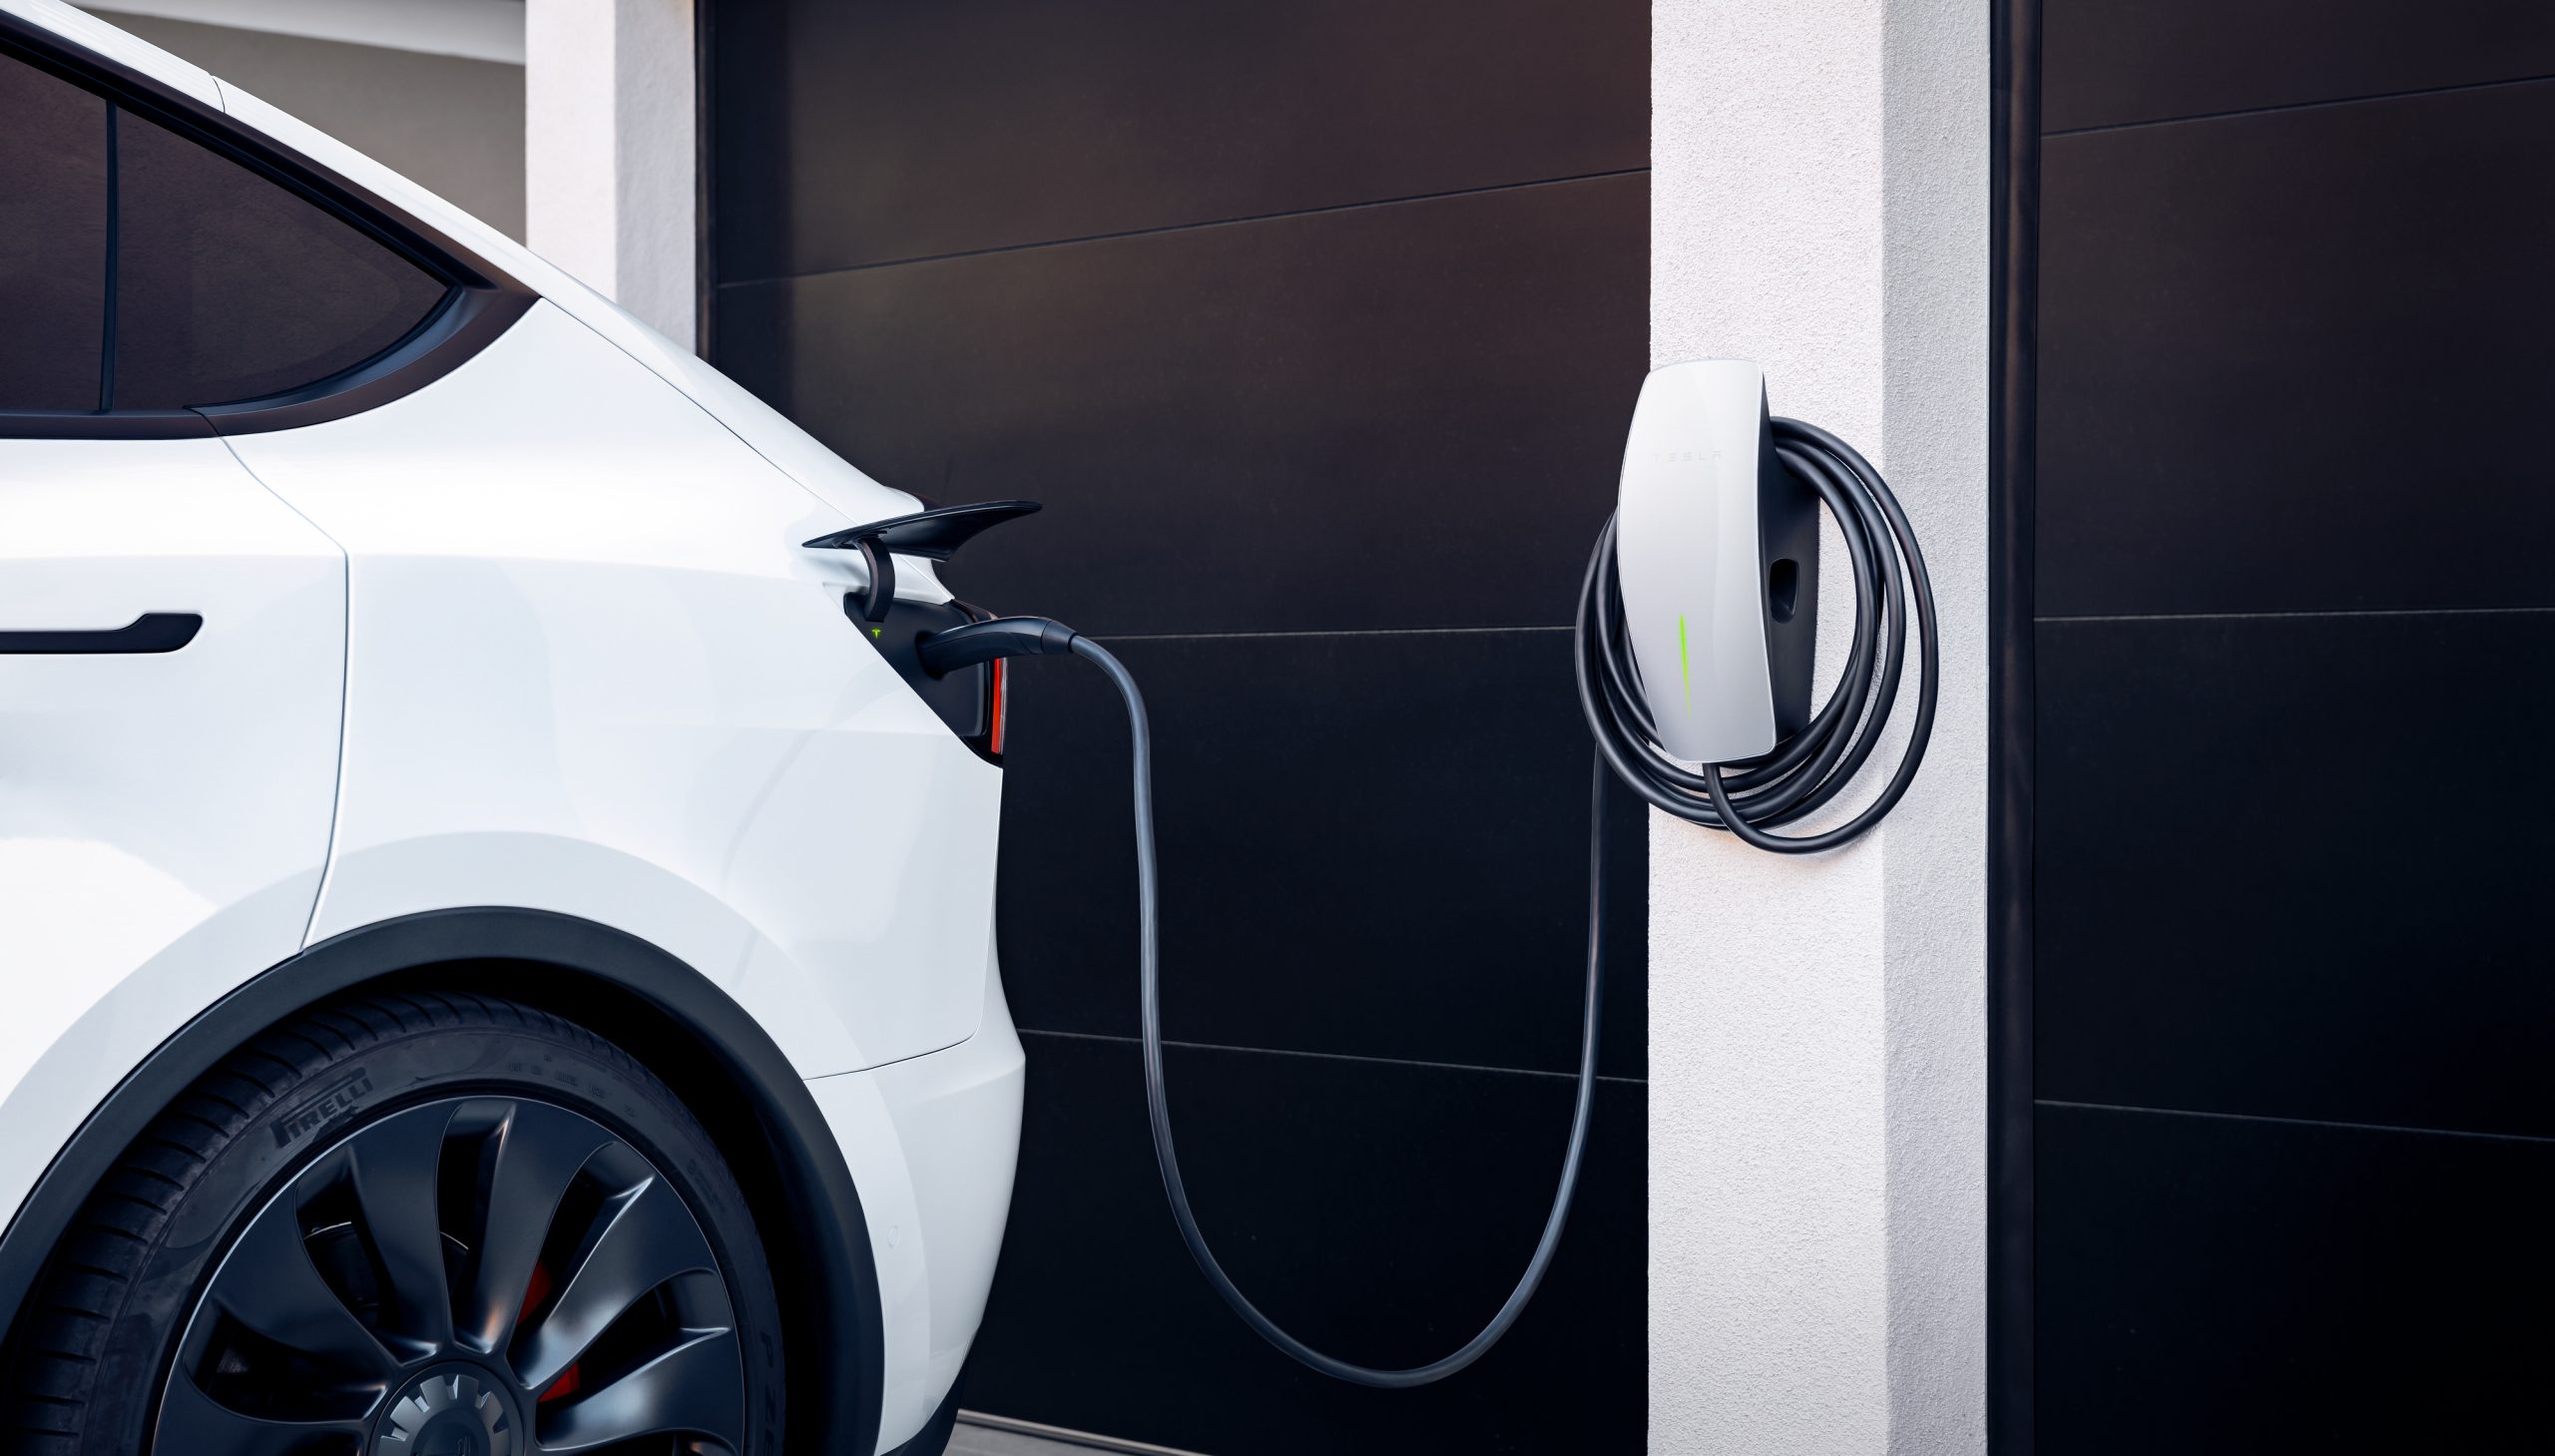 A Tesla electric vehicle charging at home